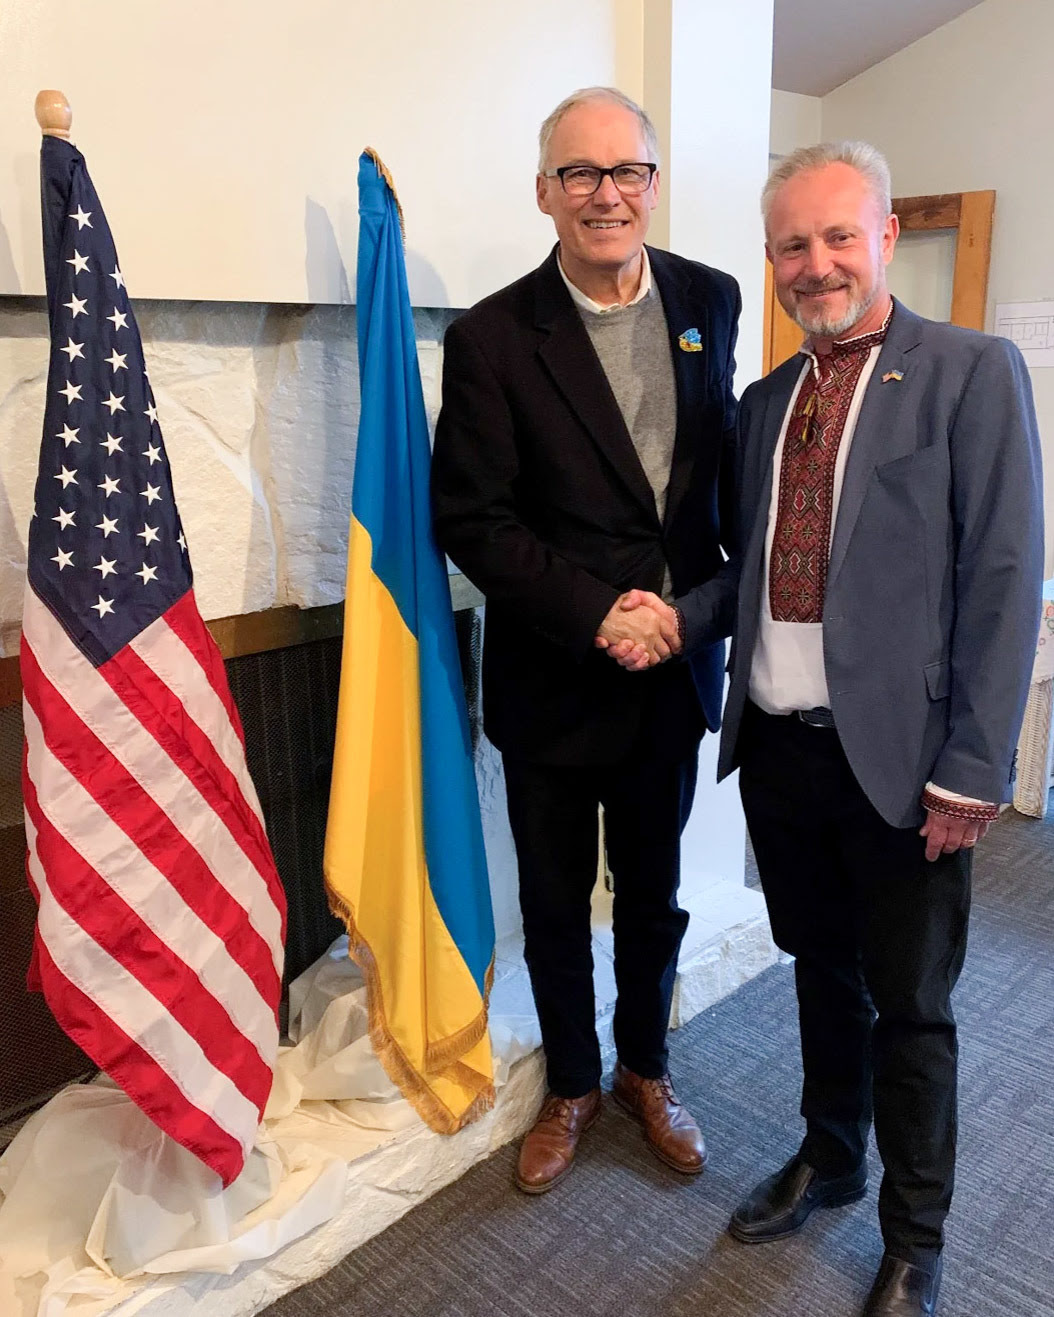 Gov. Jay Inslee shakes hands with a man standing in front of the American and Ukrainian flags.